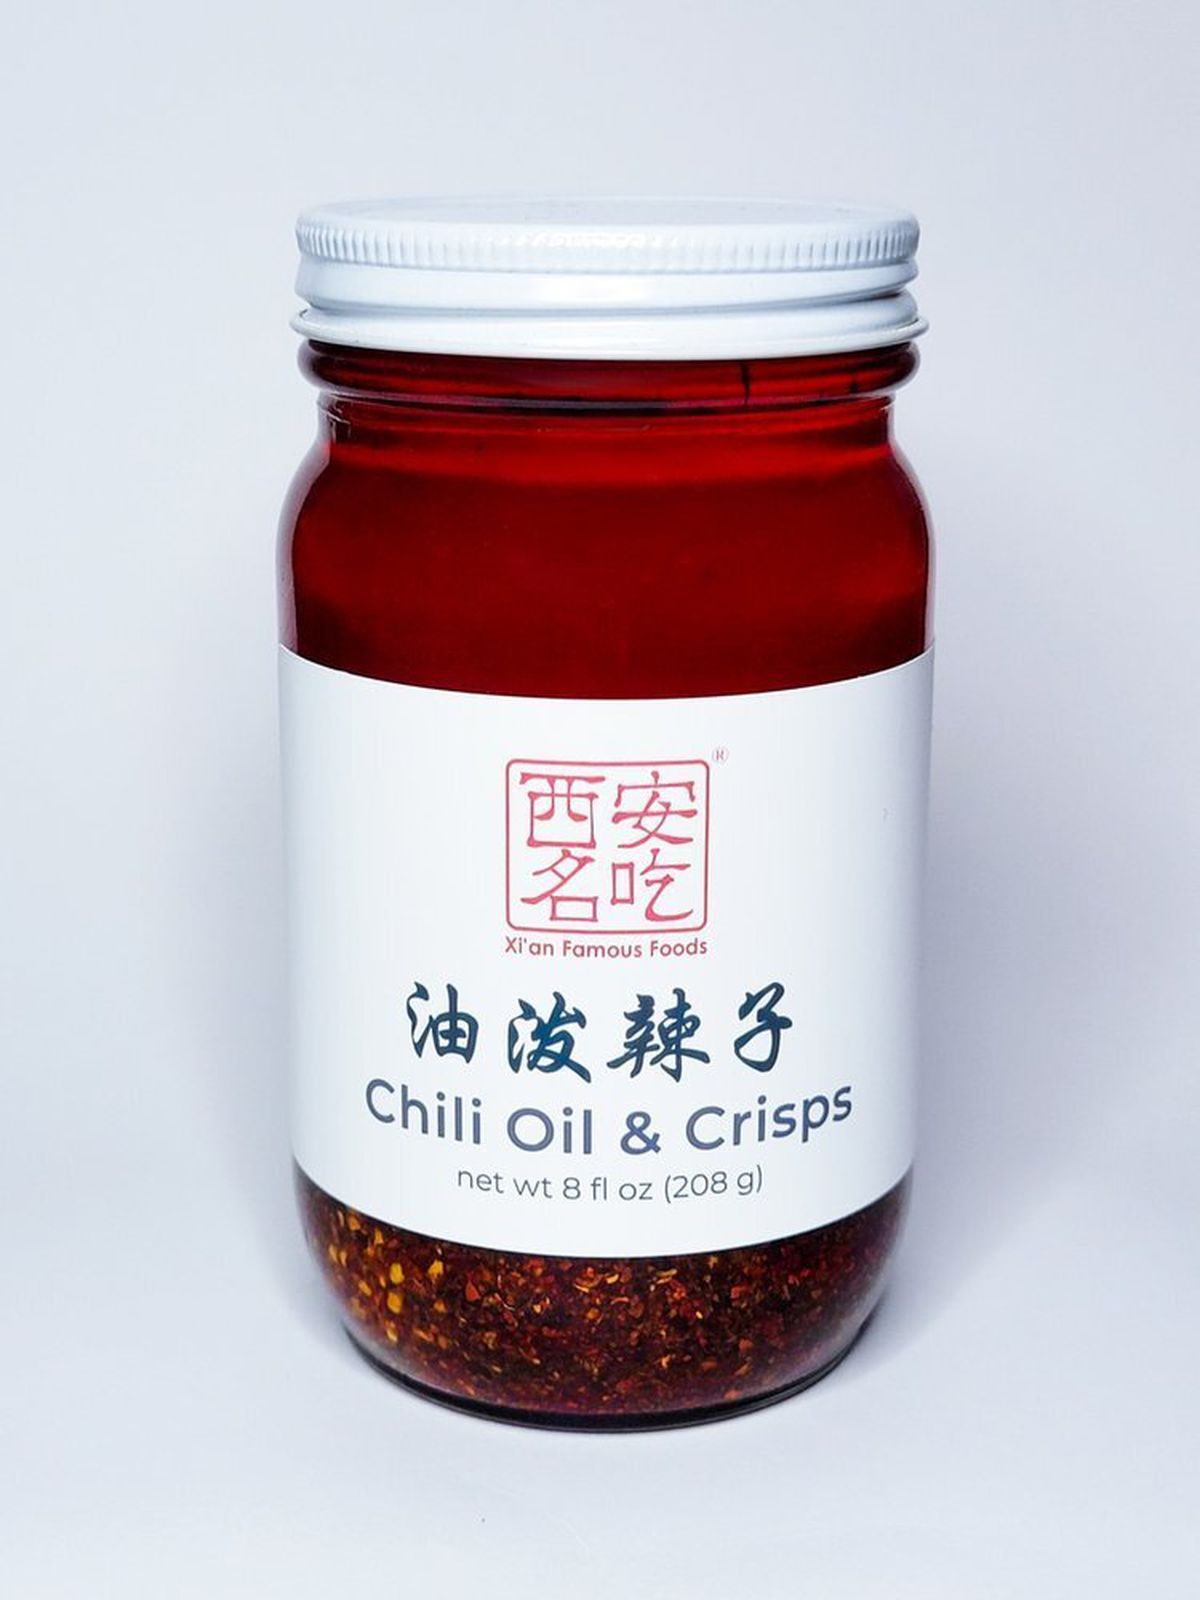 A jar of Chili oil and crisps